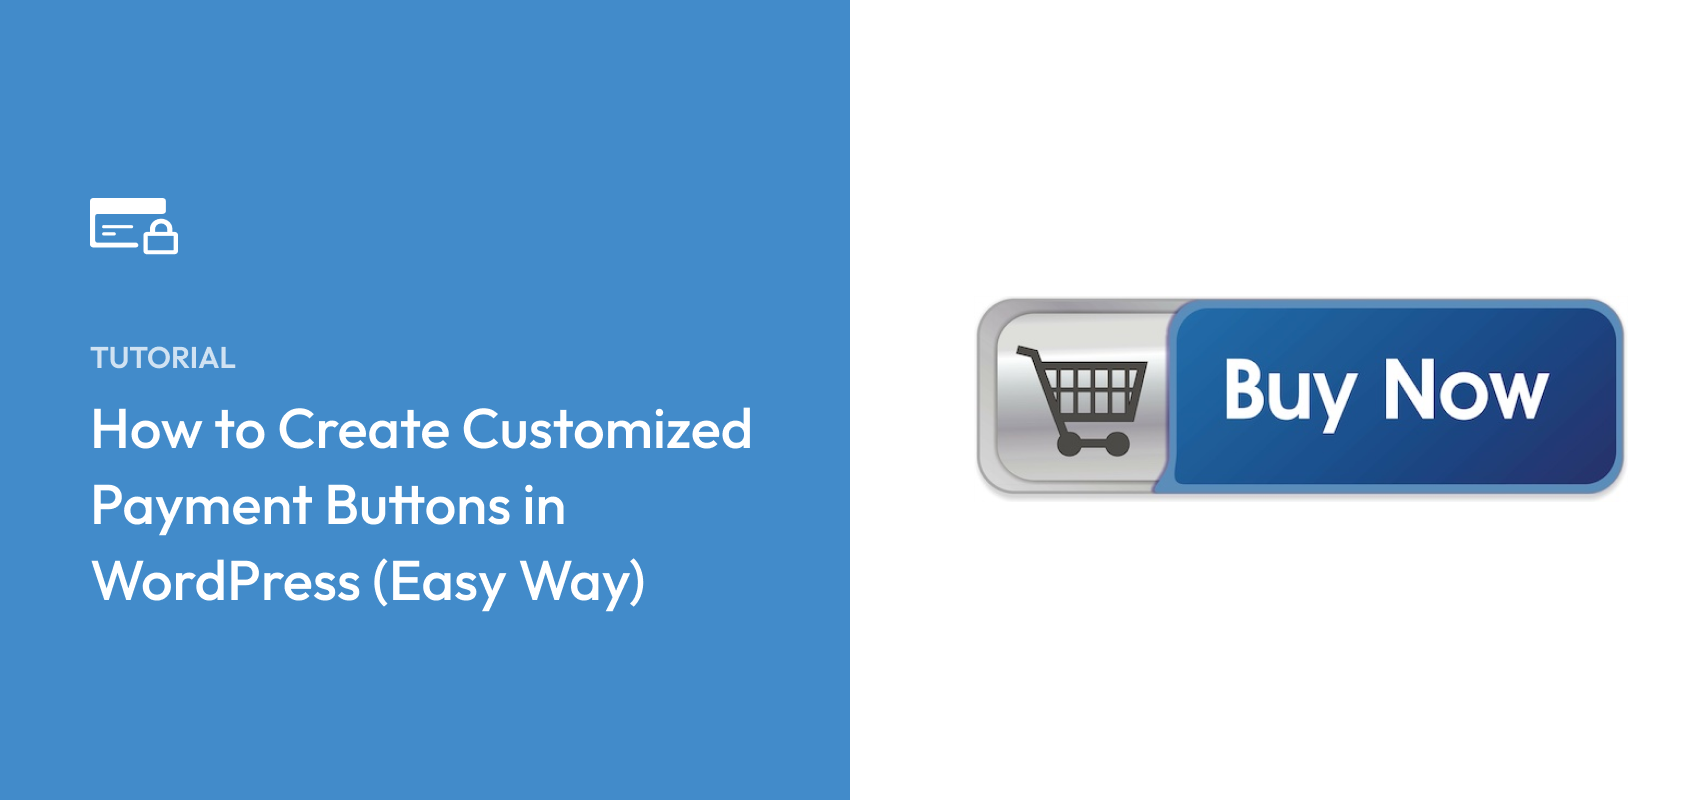 How to Create Customized Payment Buttons in WordPress